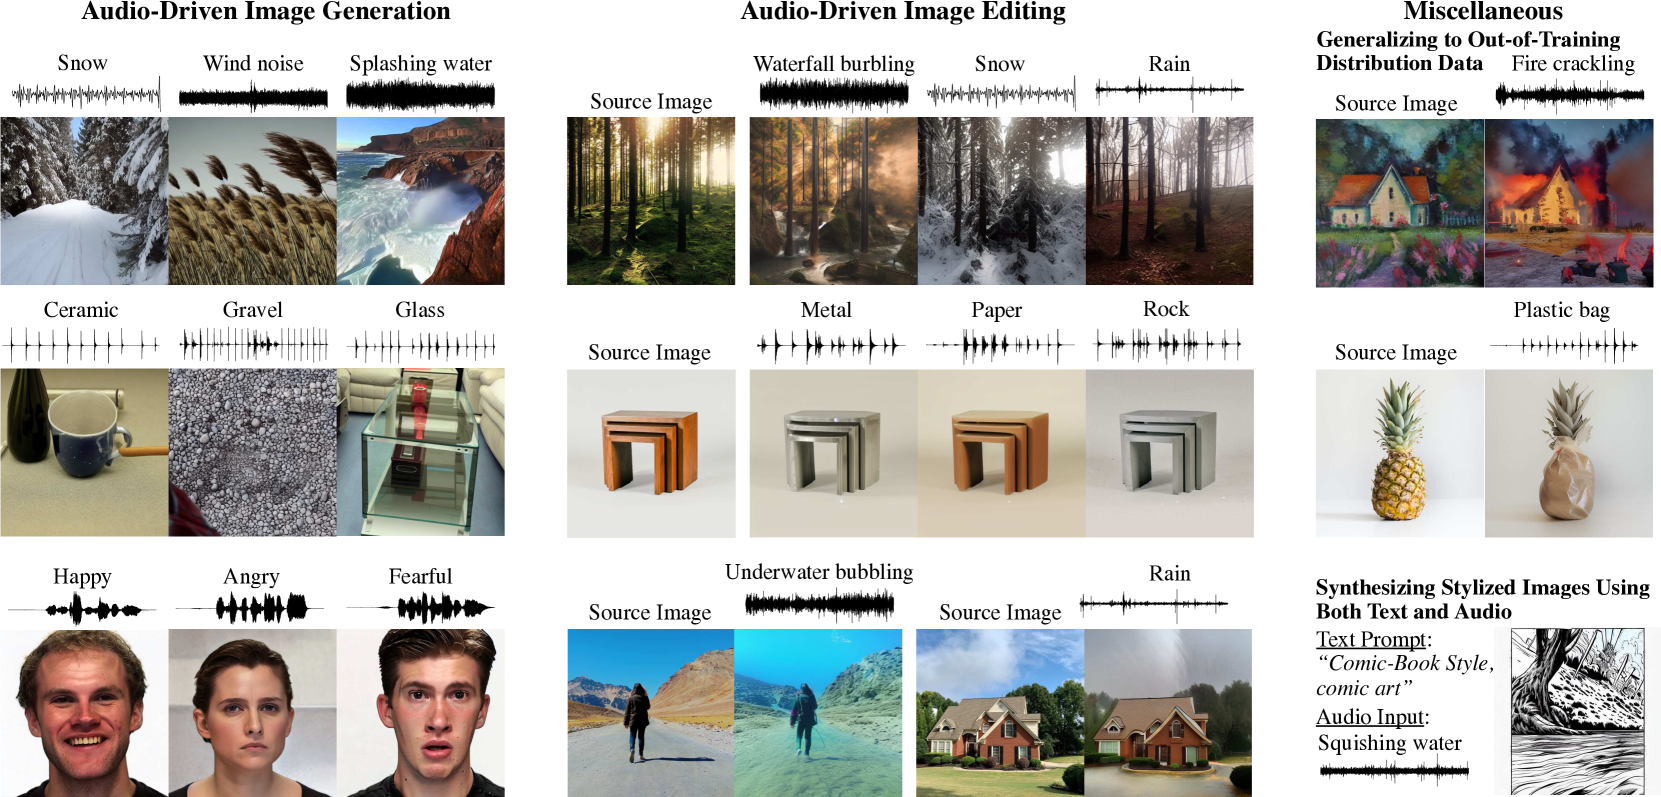 SonicDiffusion: Audio-Driven Image Generation and Editing with Pretrained Diffusion Models